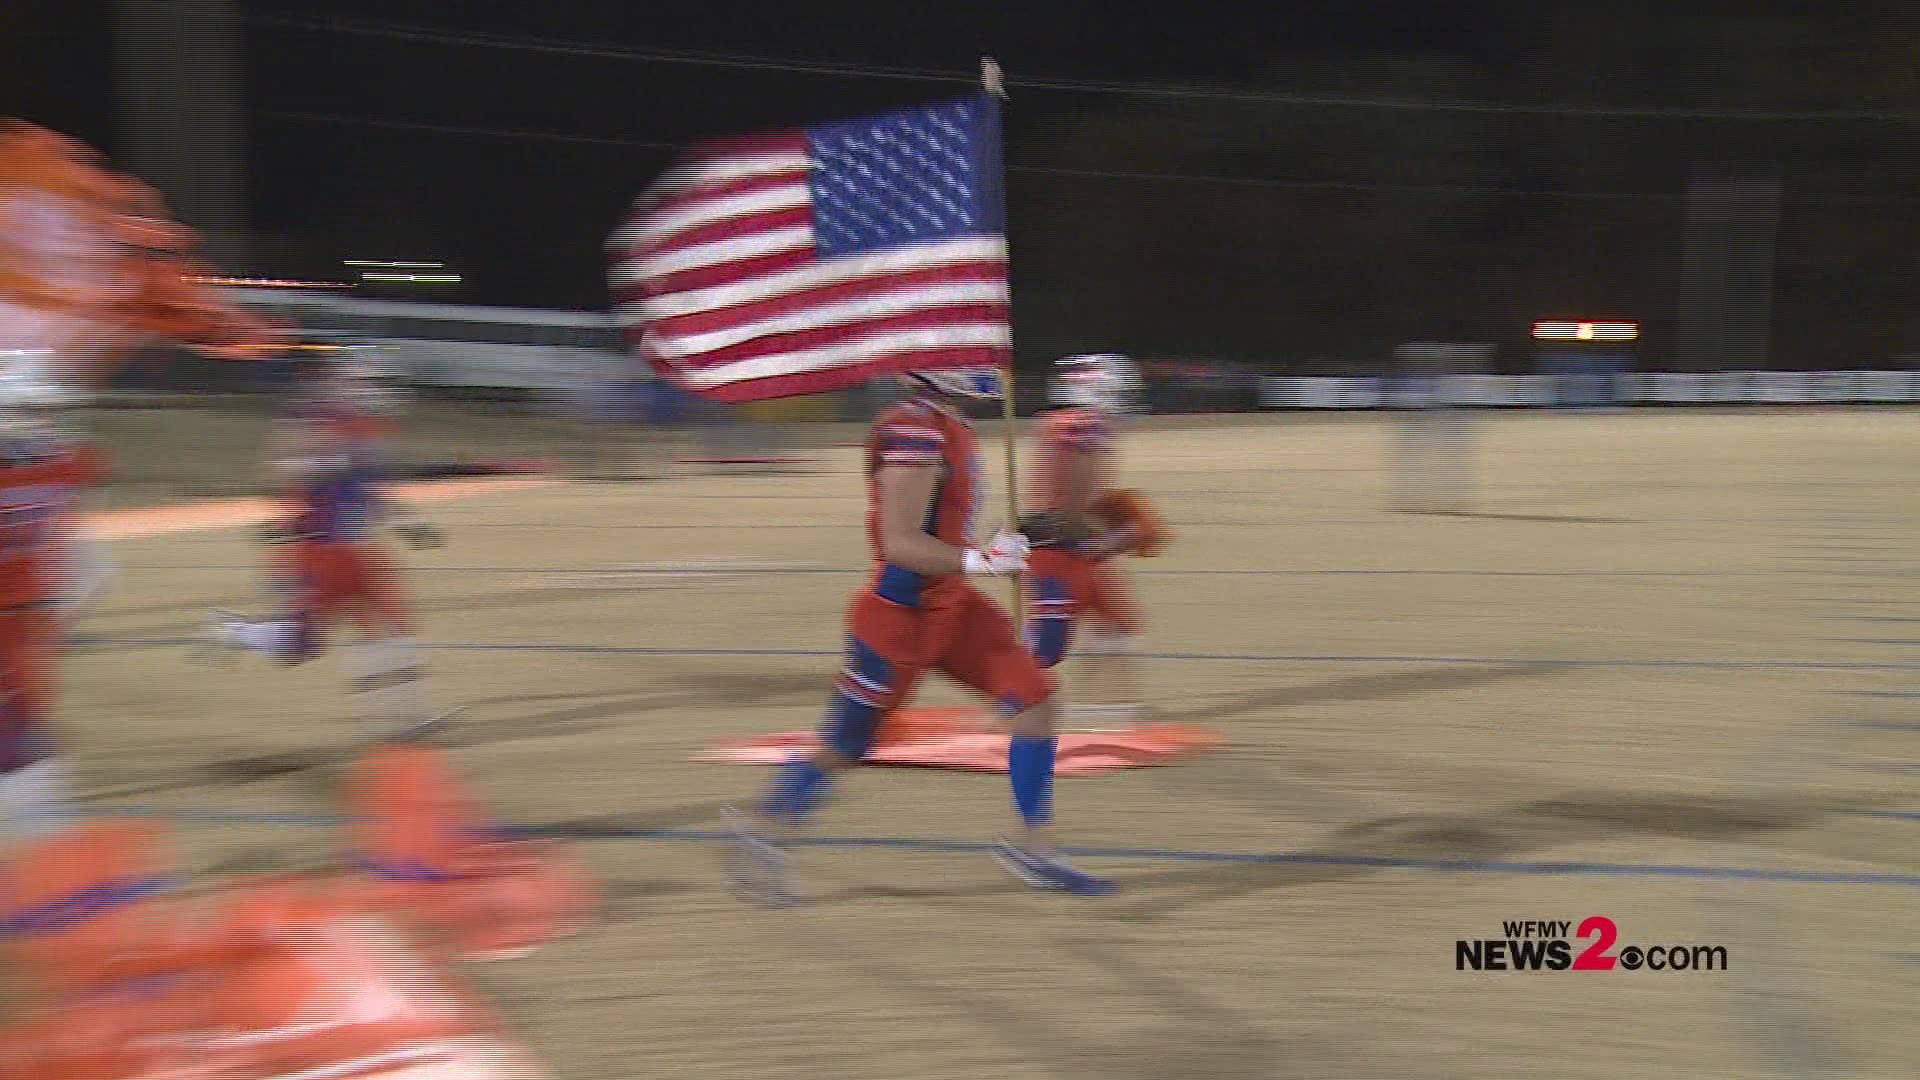 The Tigers rolled Morehead 42-0 in the first round of the playoffs.